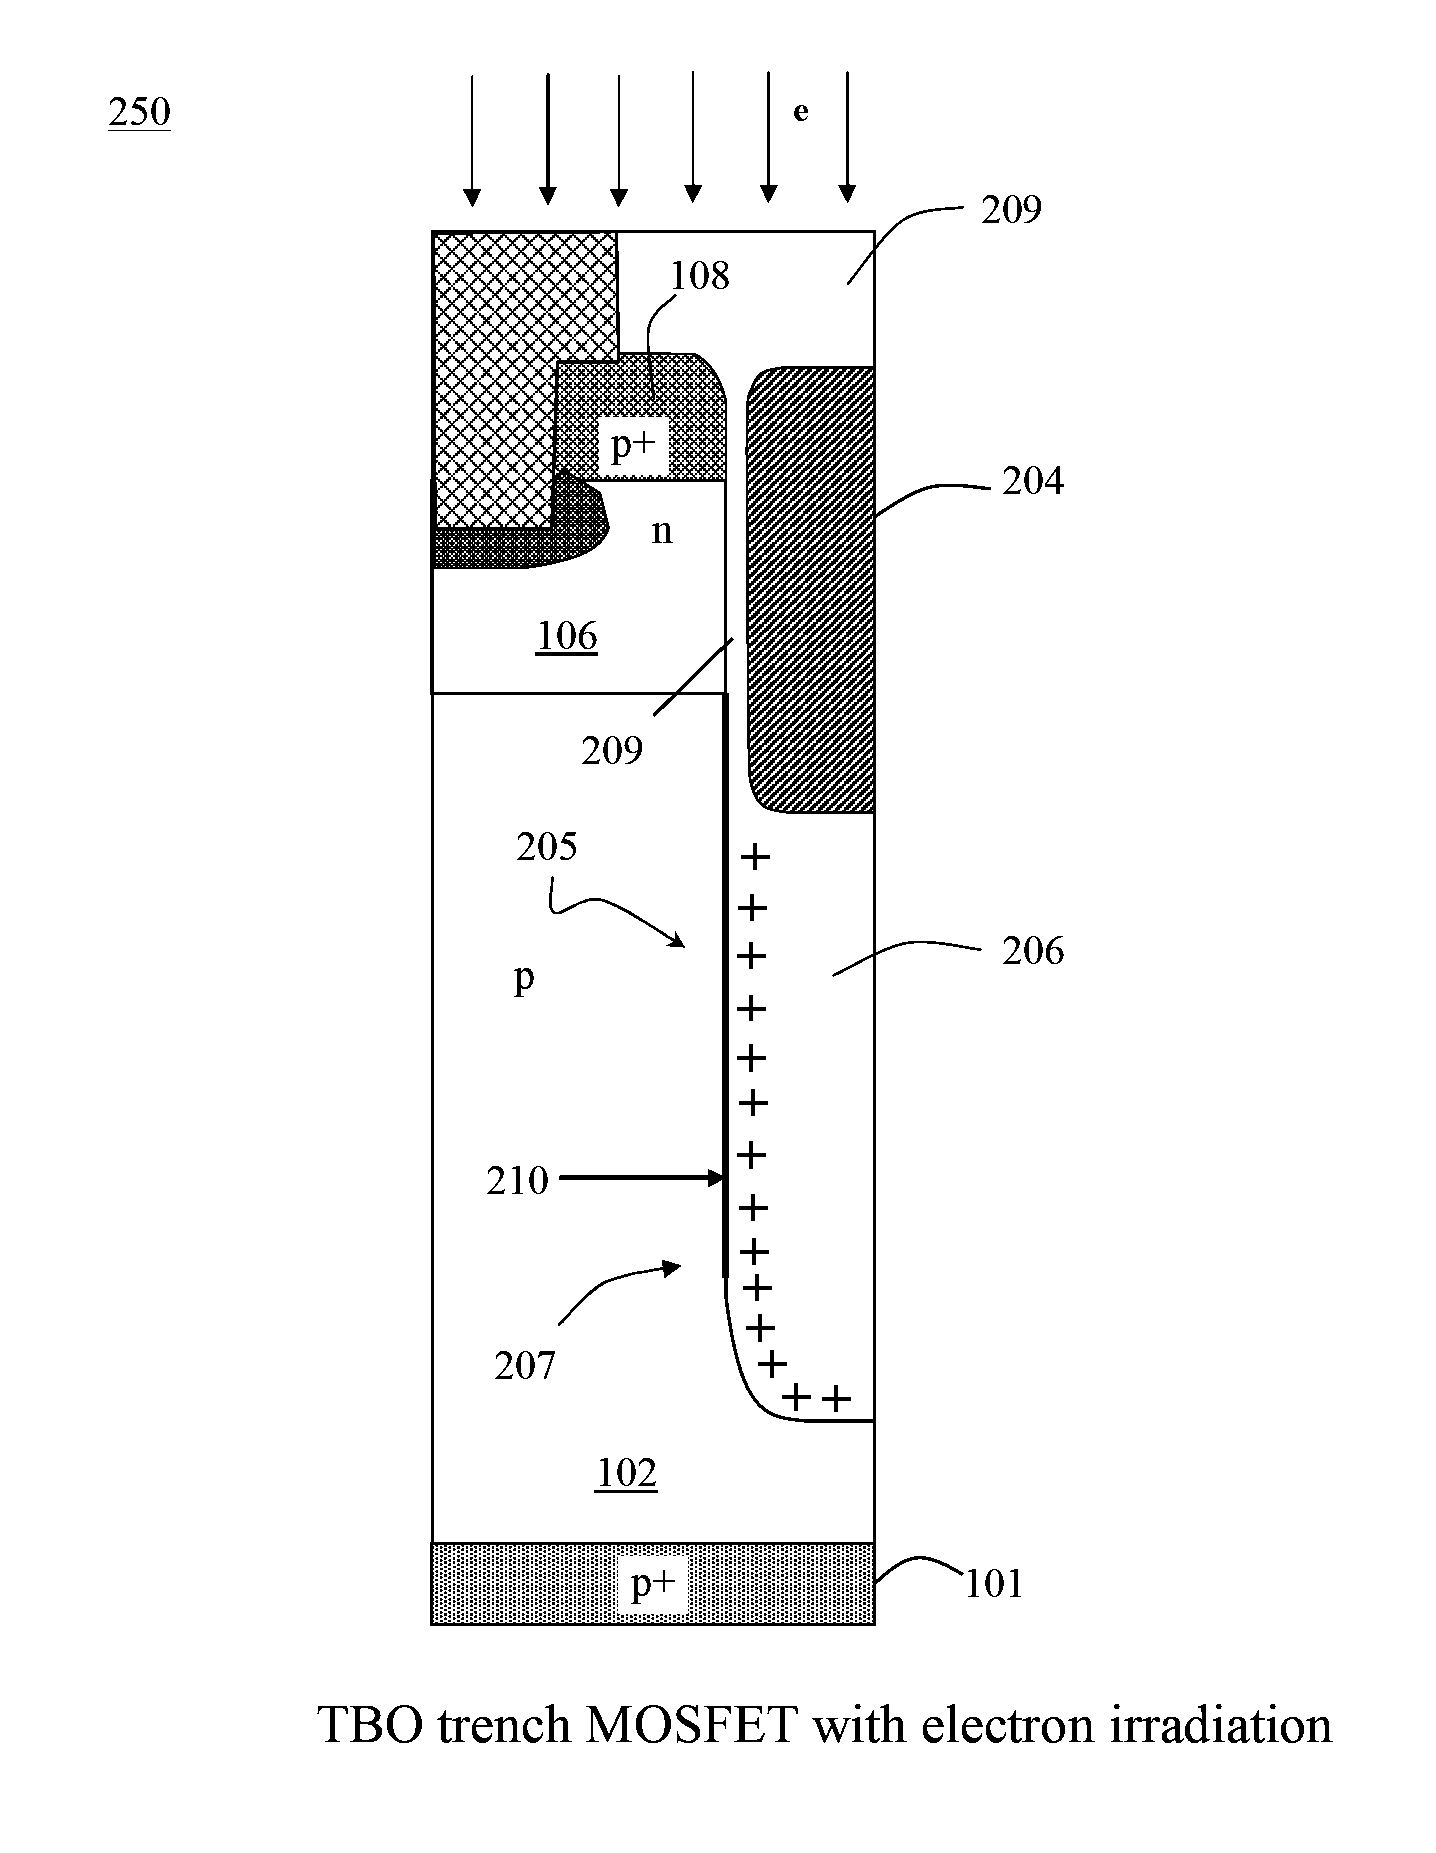 Mosfet with improved performance through induced net charge region in thick bottom insulator